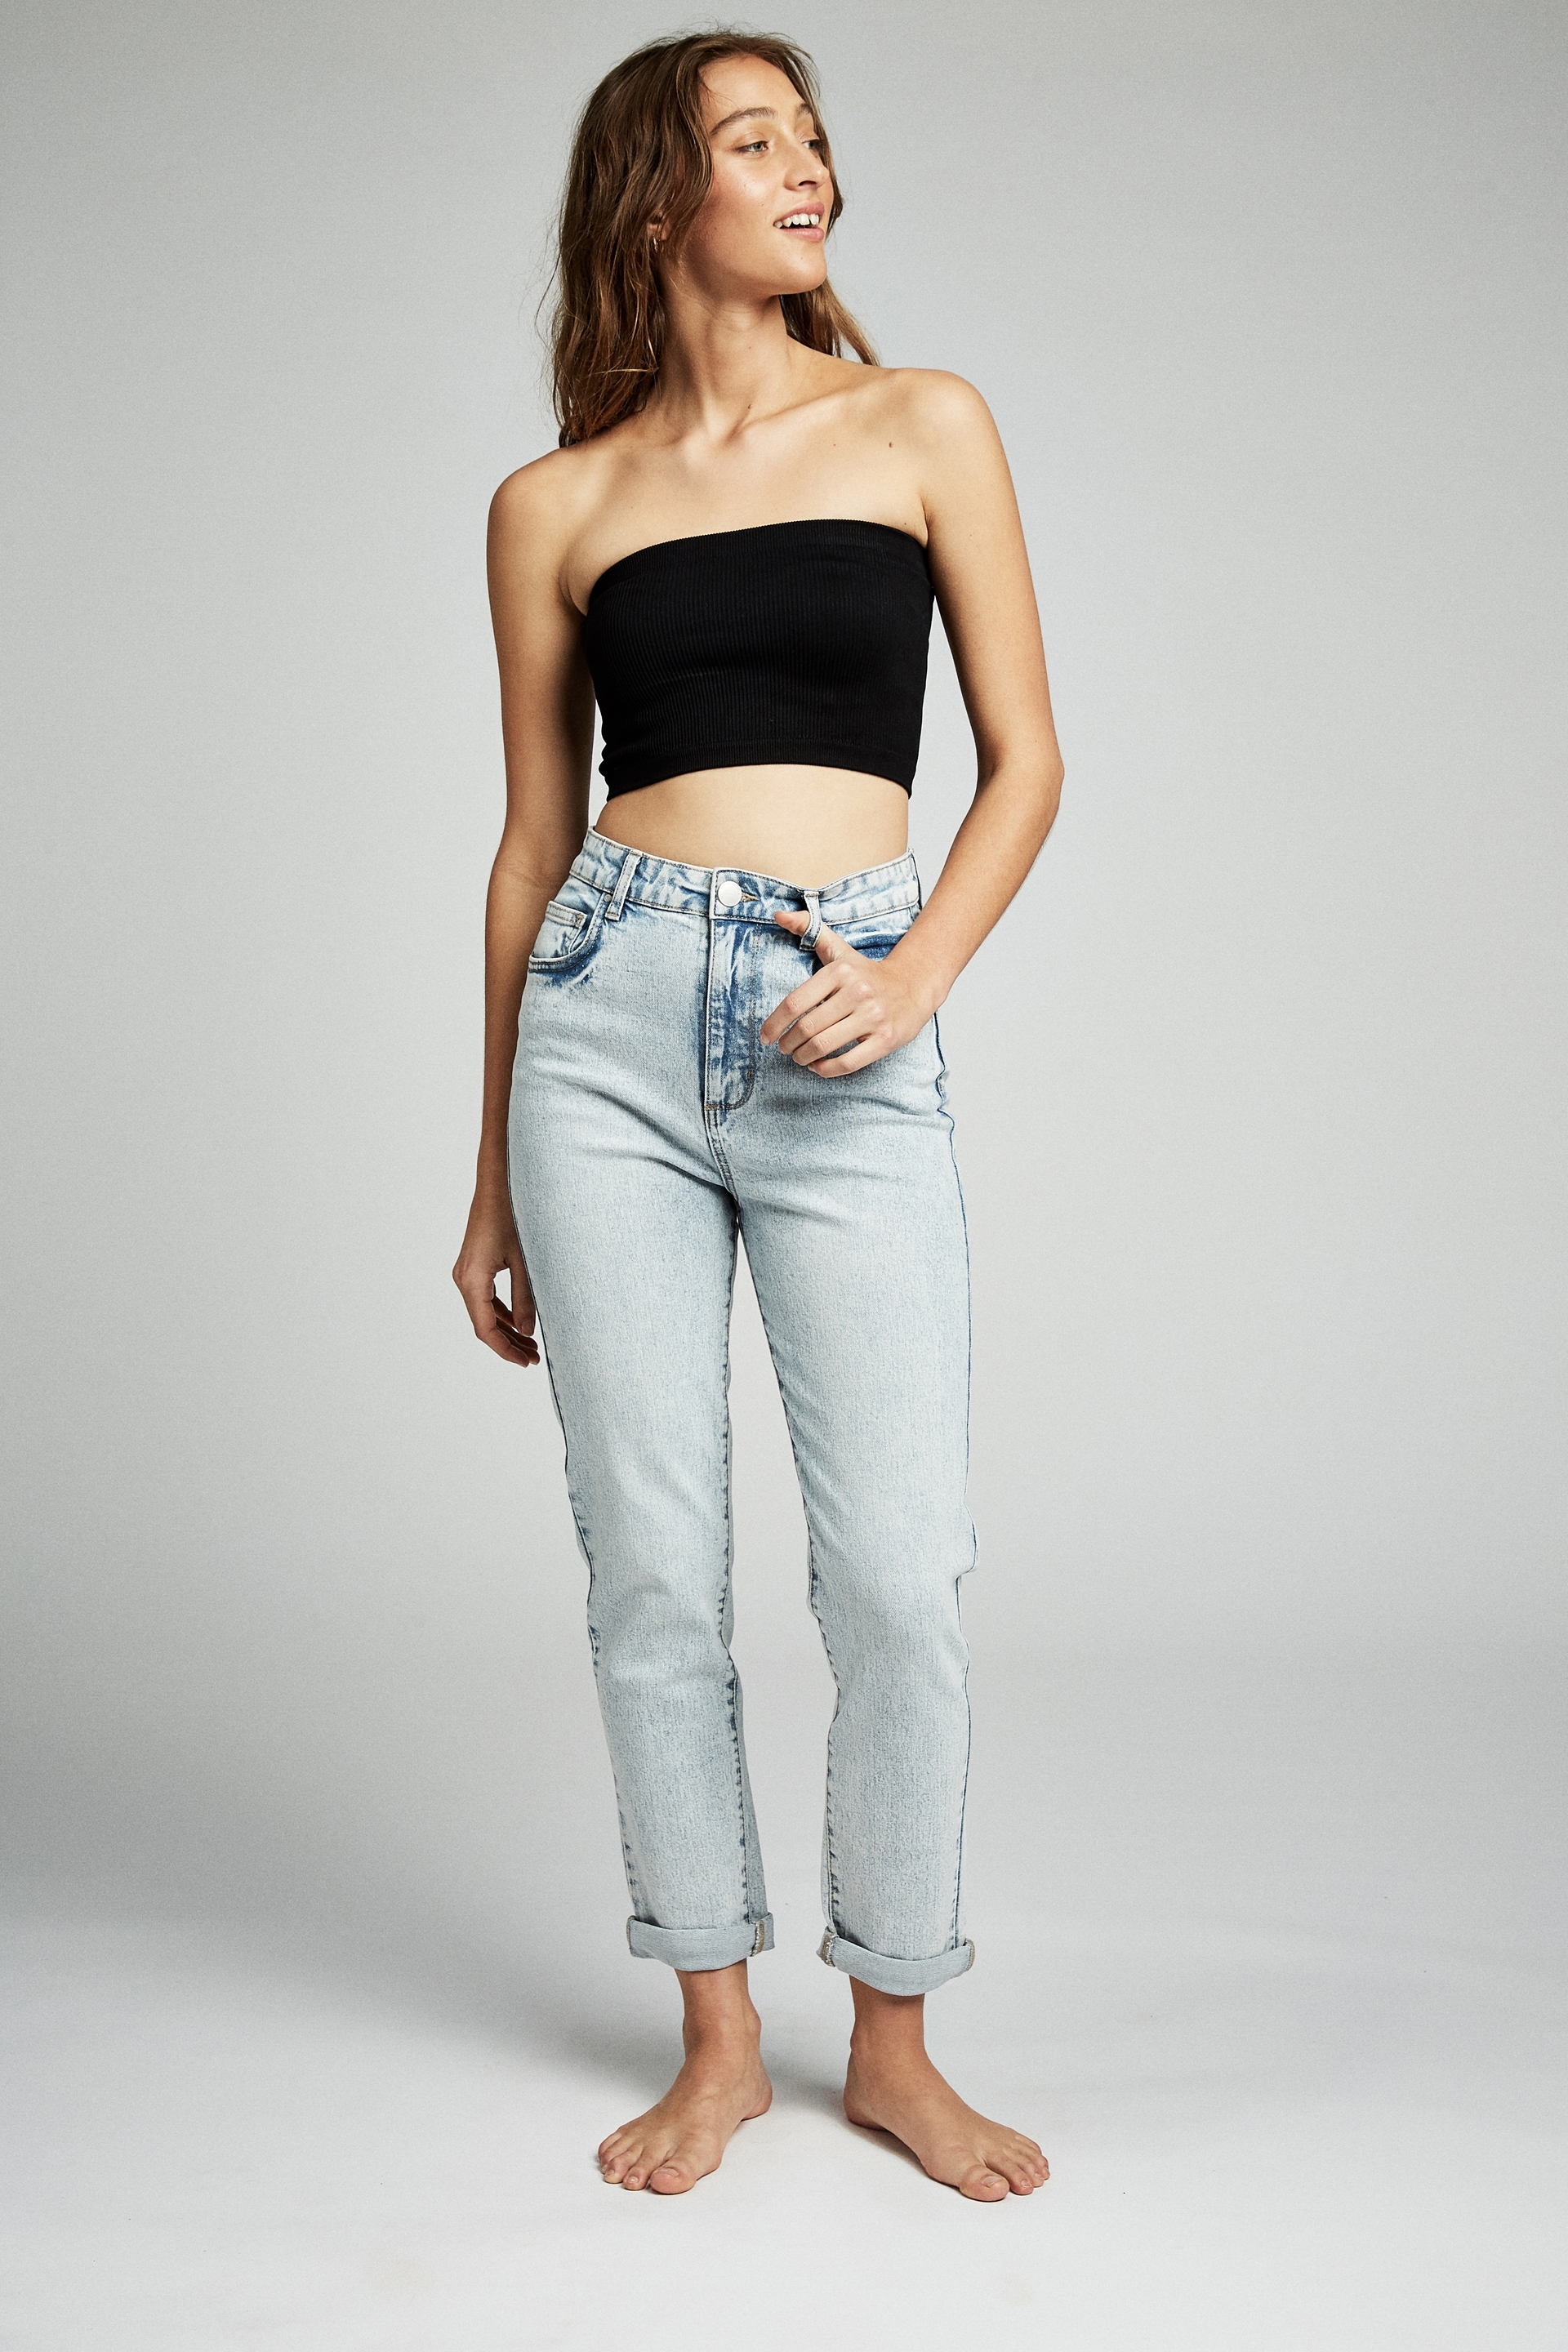 cotton on high 90s stretch jean